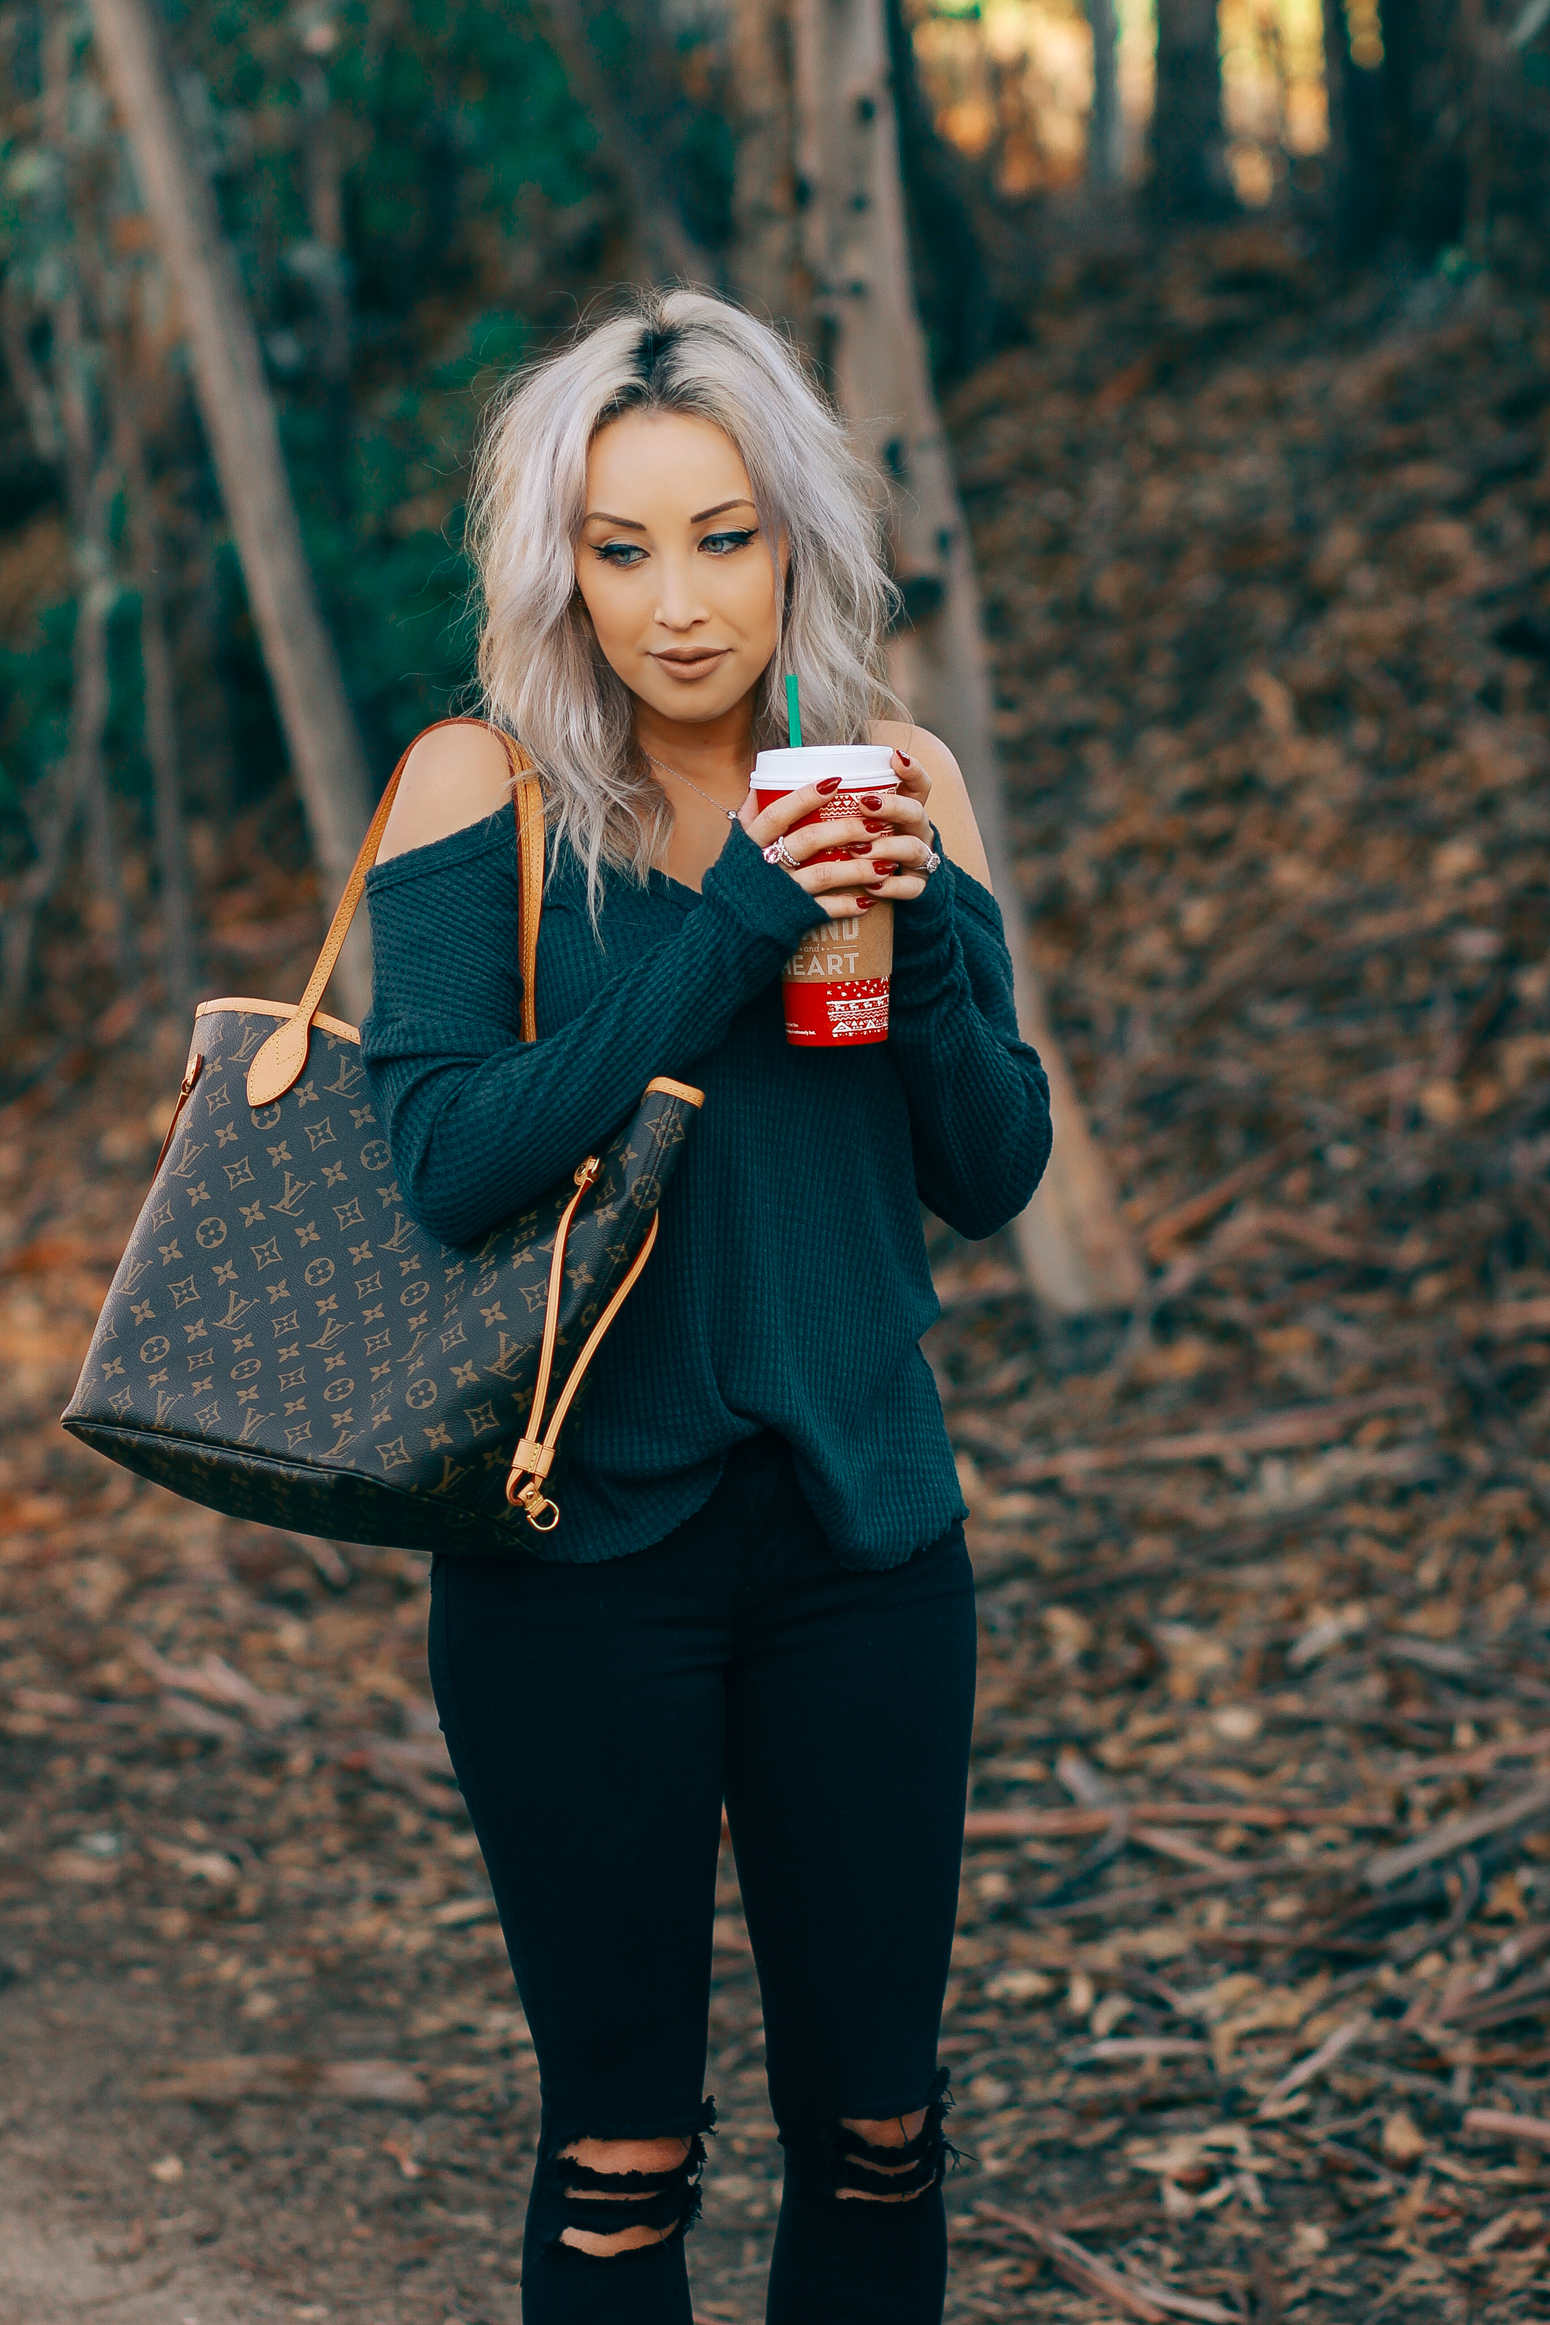 Blondie in the City | Cutout Shoulder Sweater from @ShopAtHer | Louis Vuitton Neverfull Bag